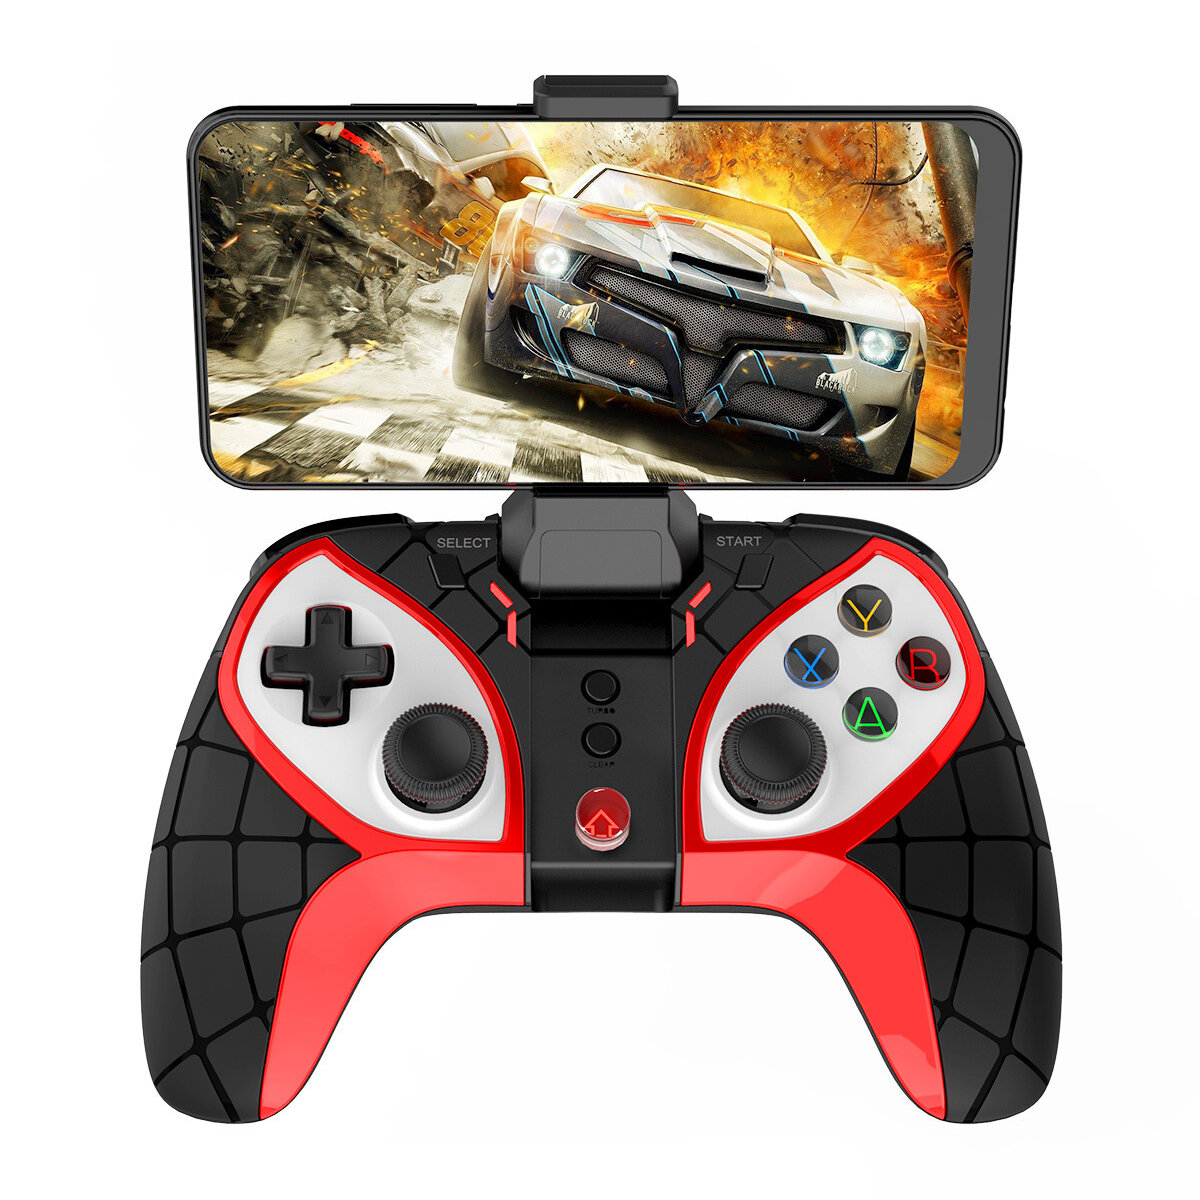 

iPega PG-9210 Bluetooth Gamepad for Nintendo Switch PS3 Game Console for iOS Android Mobile Phone PC Controller Joystick